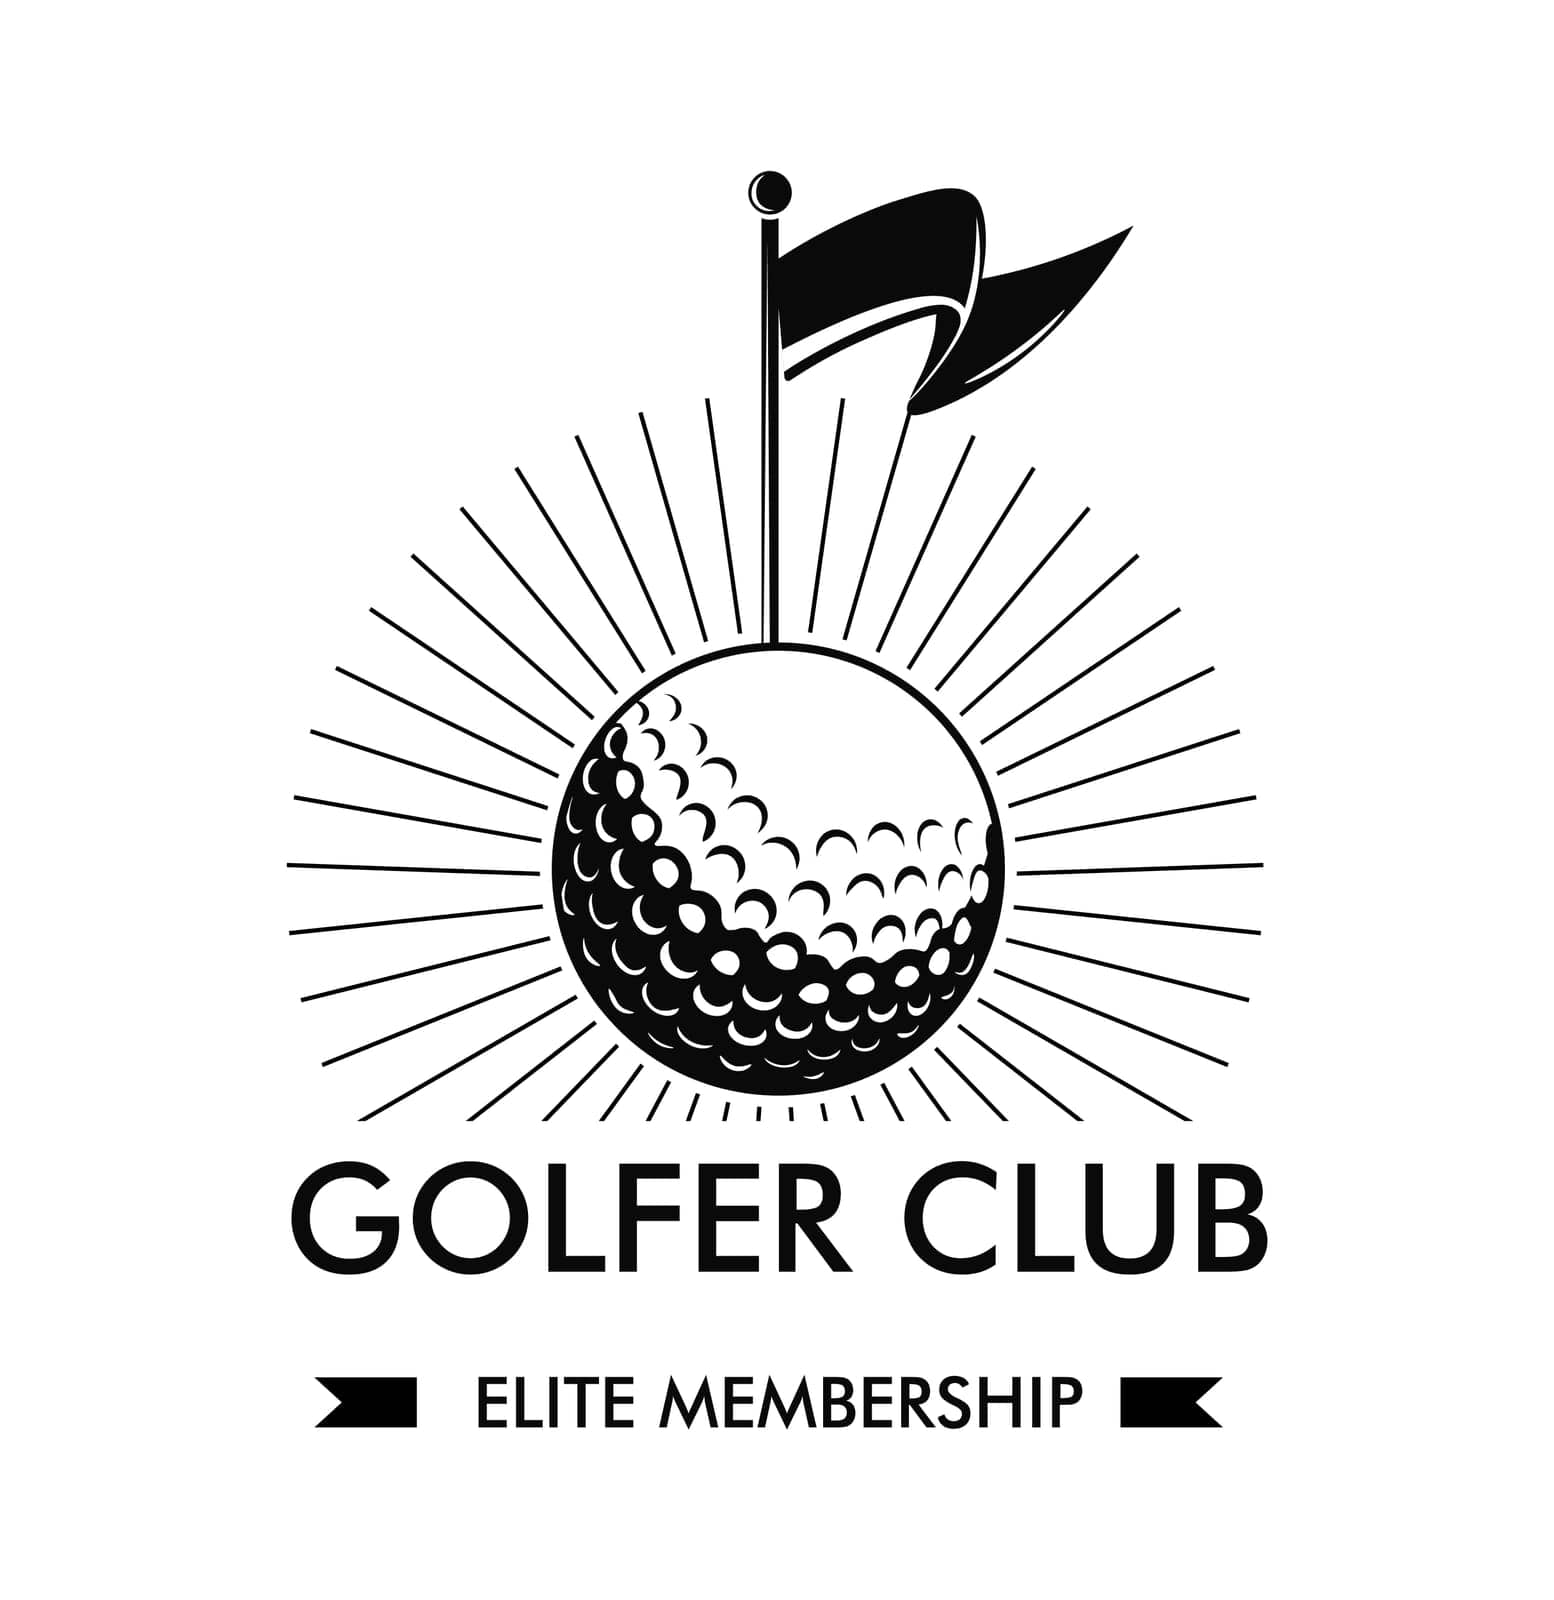 Golf club for golfers professional players. Isolated icon of ball and flag, elite membership for wealthy people. Entertainment and fun. Logotype or label, emblem or logo. Vector in flat style